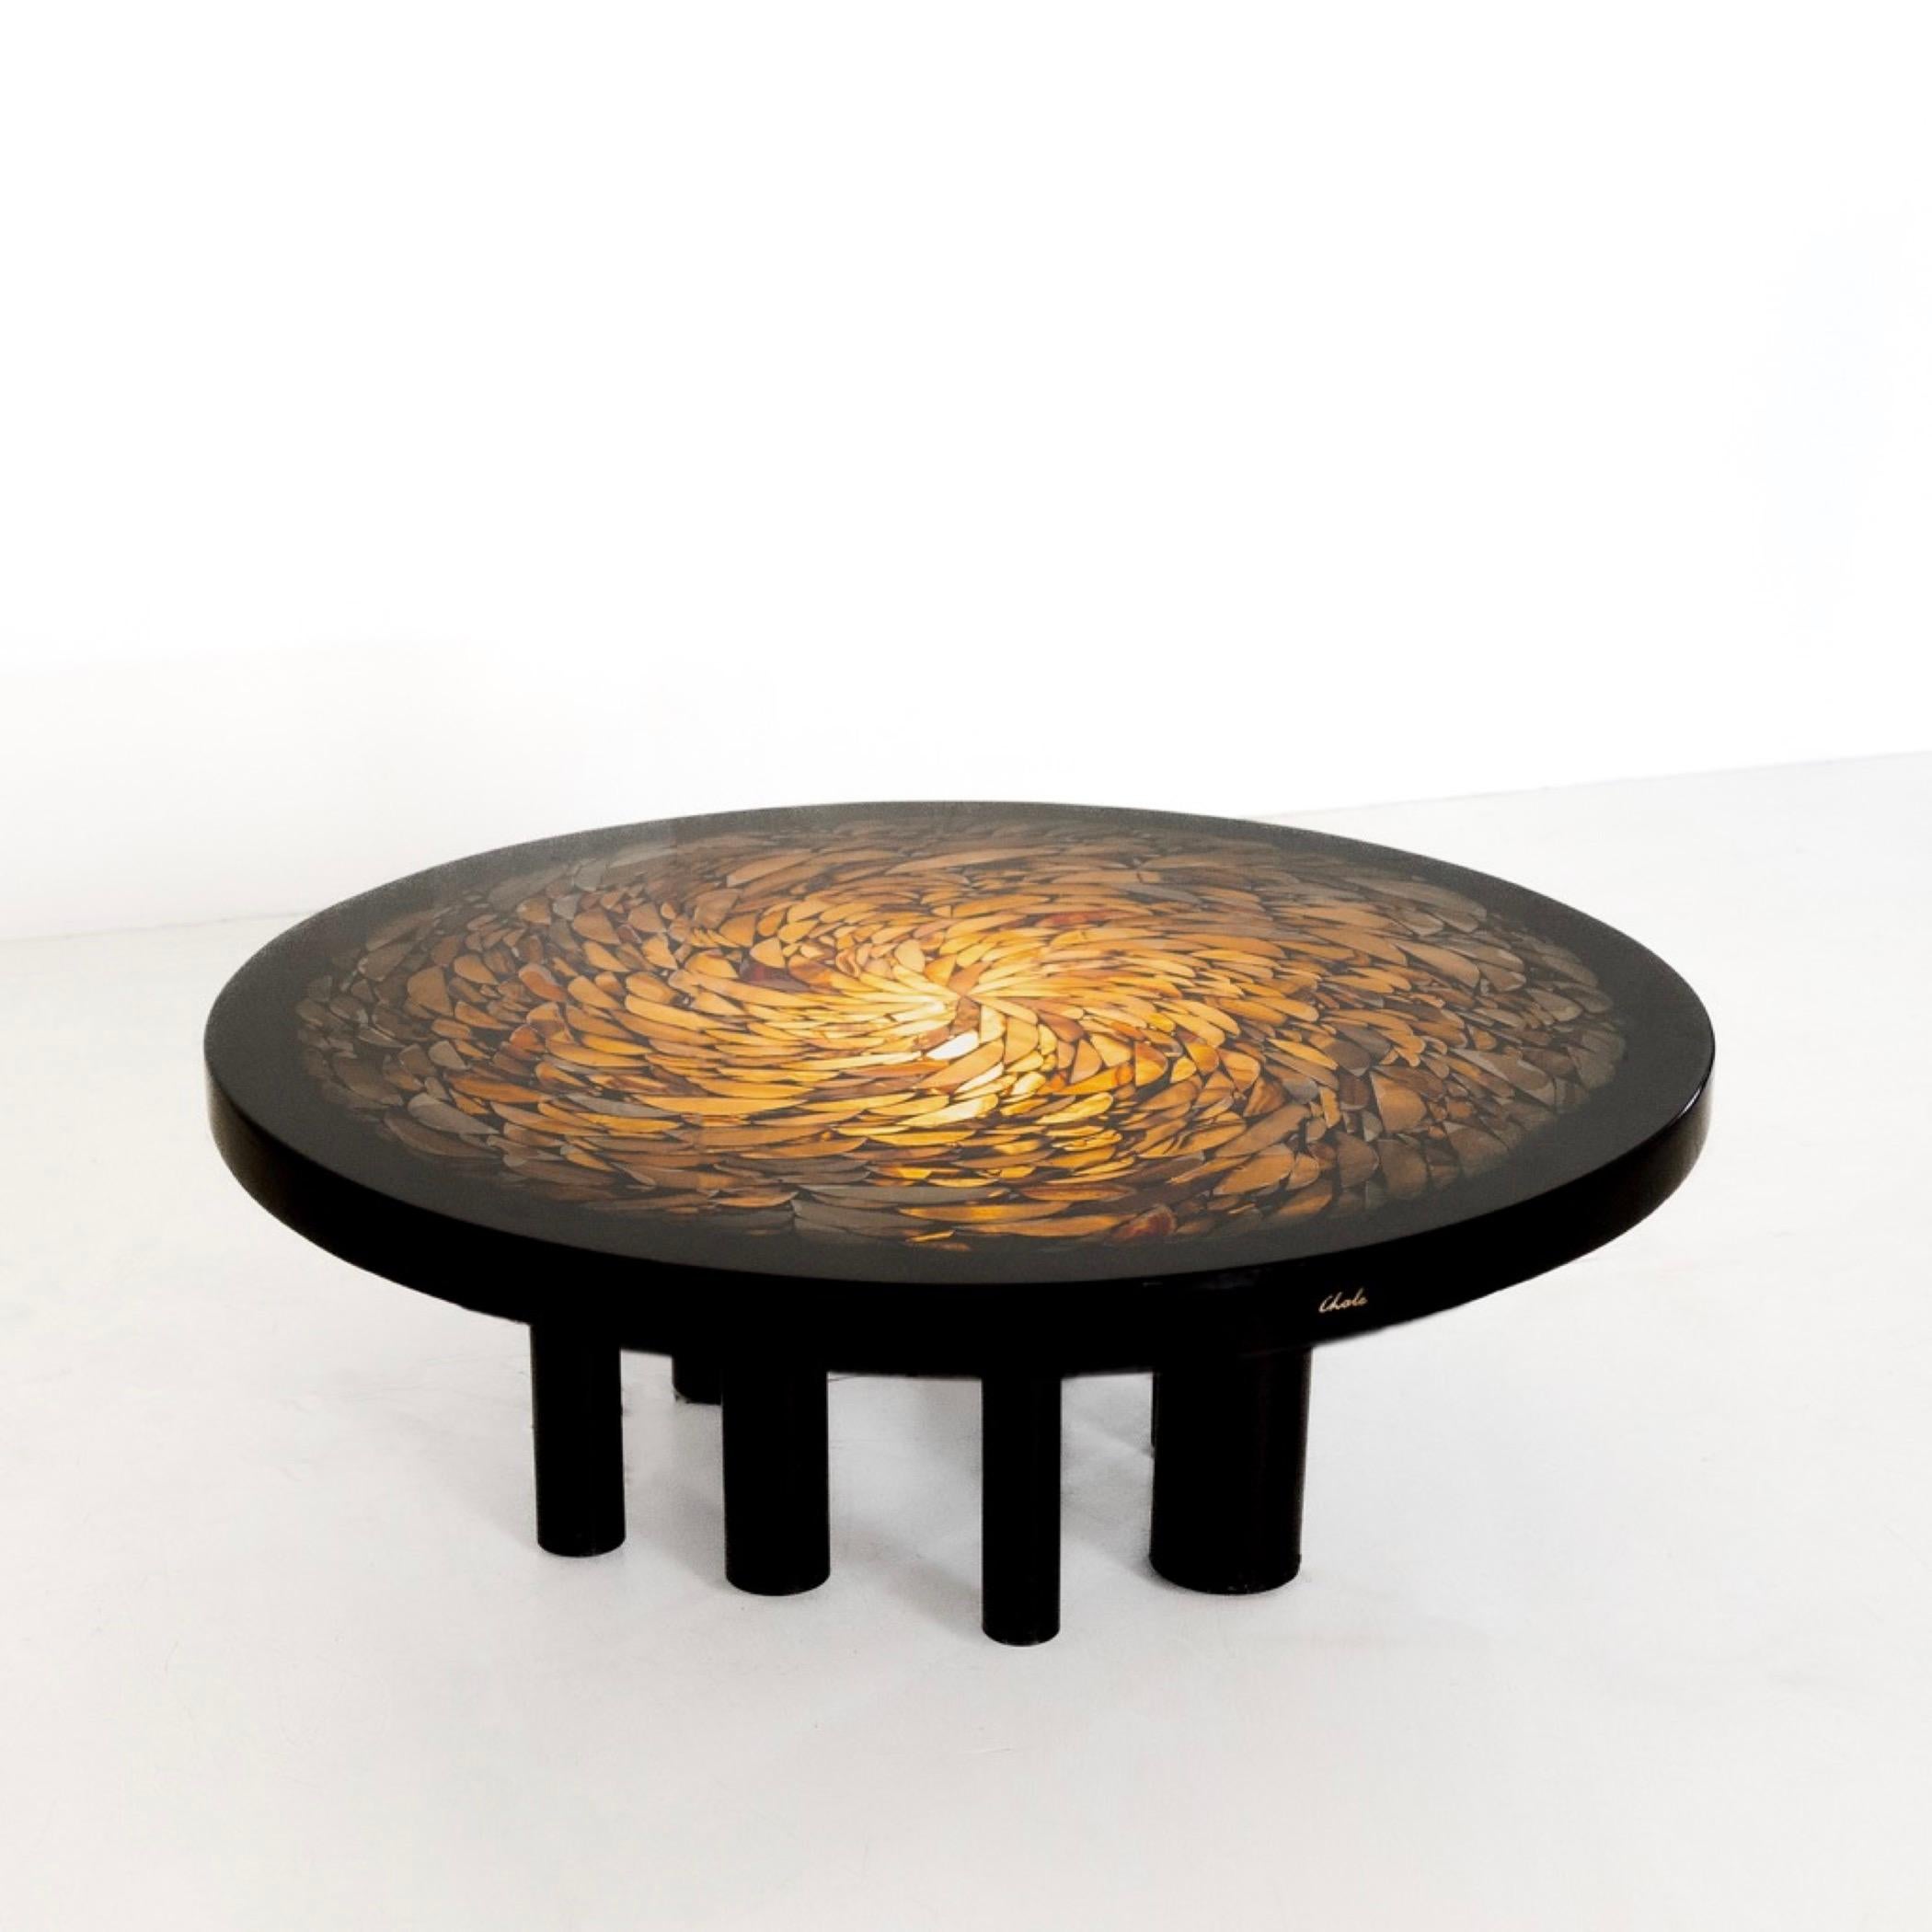 Backlit cocktail table by Ado Chale
Backlit cocktail table by Ado Chale.
Backlit table in resin decorated with half-moon mosaic of carnelian agate.
Black conical base with 8 legs of different diameters mounted on casters.
A bulb is housed under the